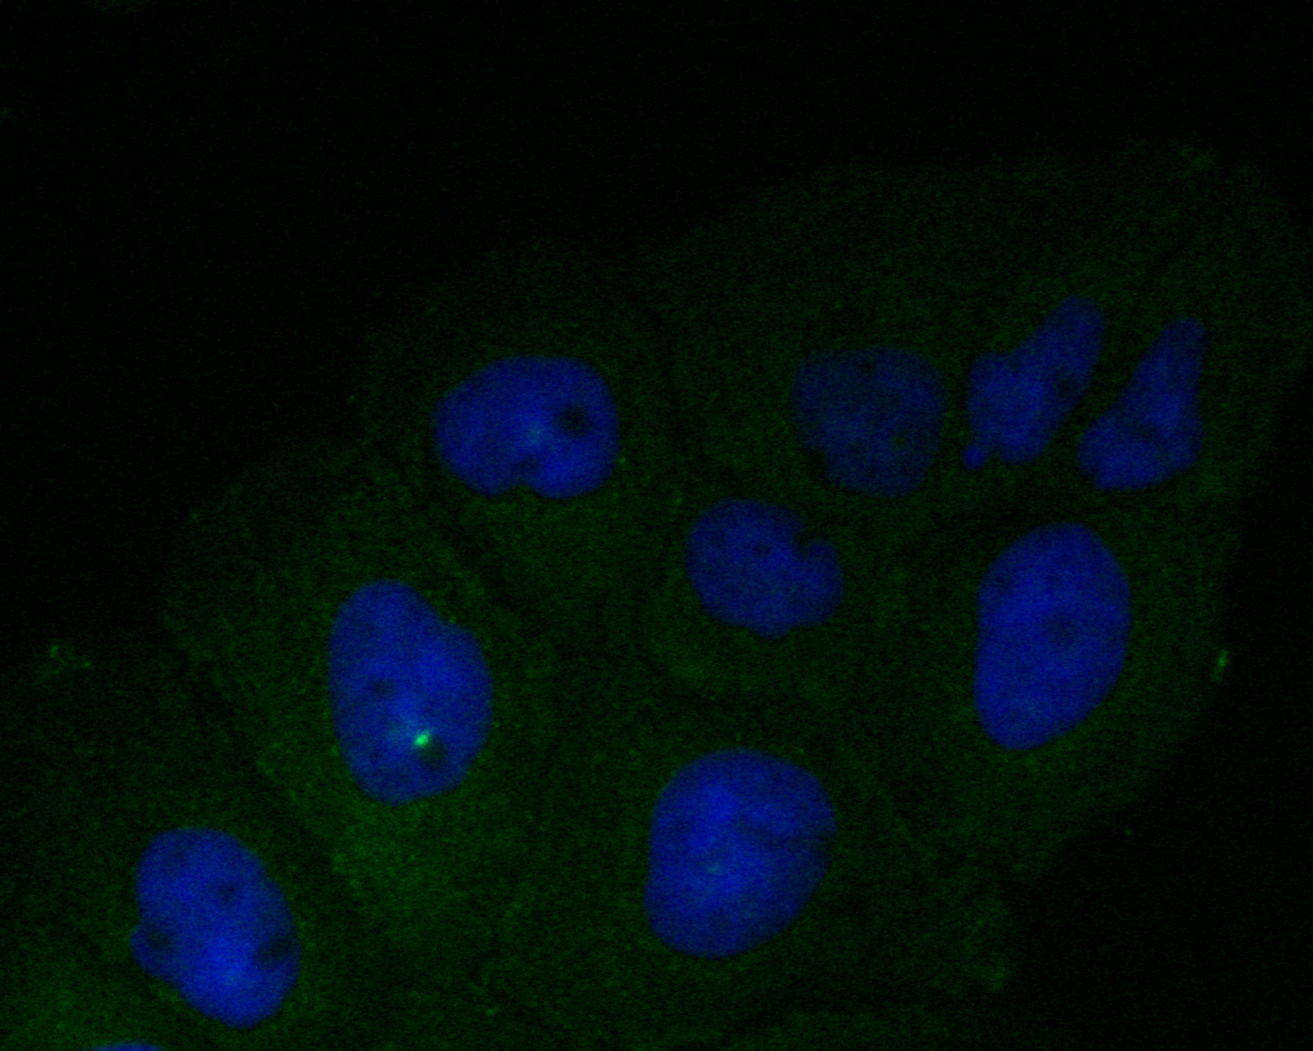 ICC staining of DFNA5/GSDME in A431 cells (green). Formalin fixed cells were permeabilized with 0.1% Triton X-100 in TBS for 10 minutes at room temperature and blocked with 1% Blocker BSA for 15 minutes at room temperature. Cells were probed with the primary antibody (EM1901-49, 1/50) for 1 hour at room temperature, washed with PBS. Alexa Fluor®488 Goat anti-Mouse IgG was used as the secondary antibody at 1/1,000 dilution. The nuclear counter stain is DAPI (blue).